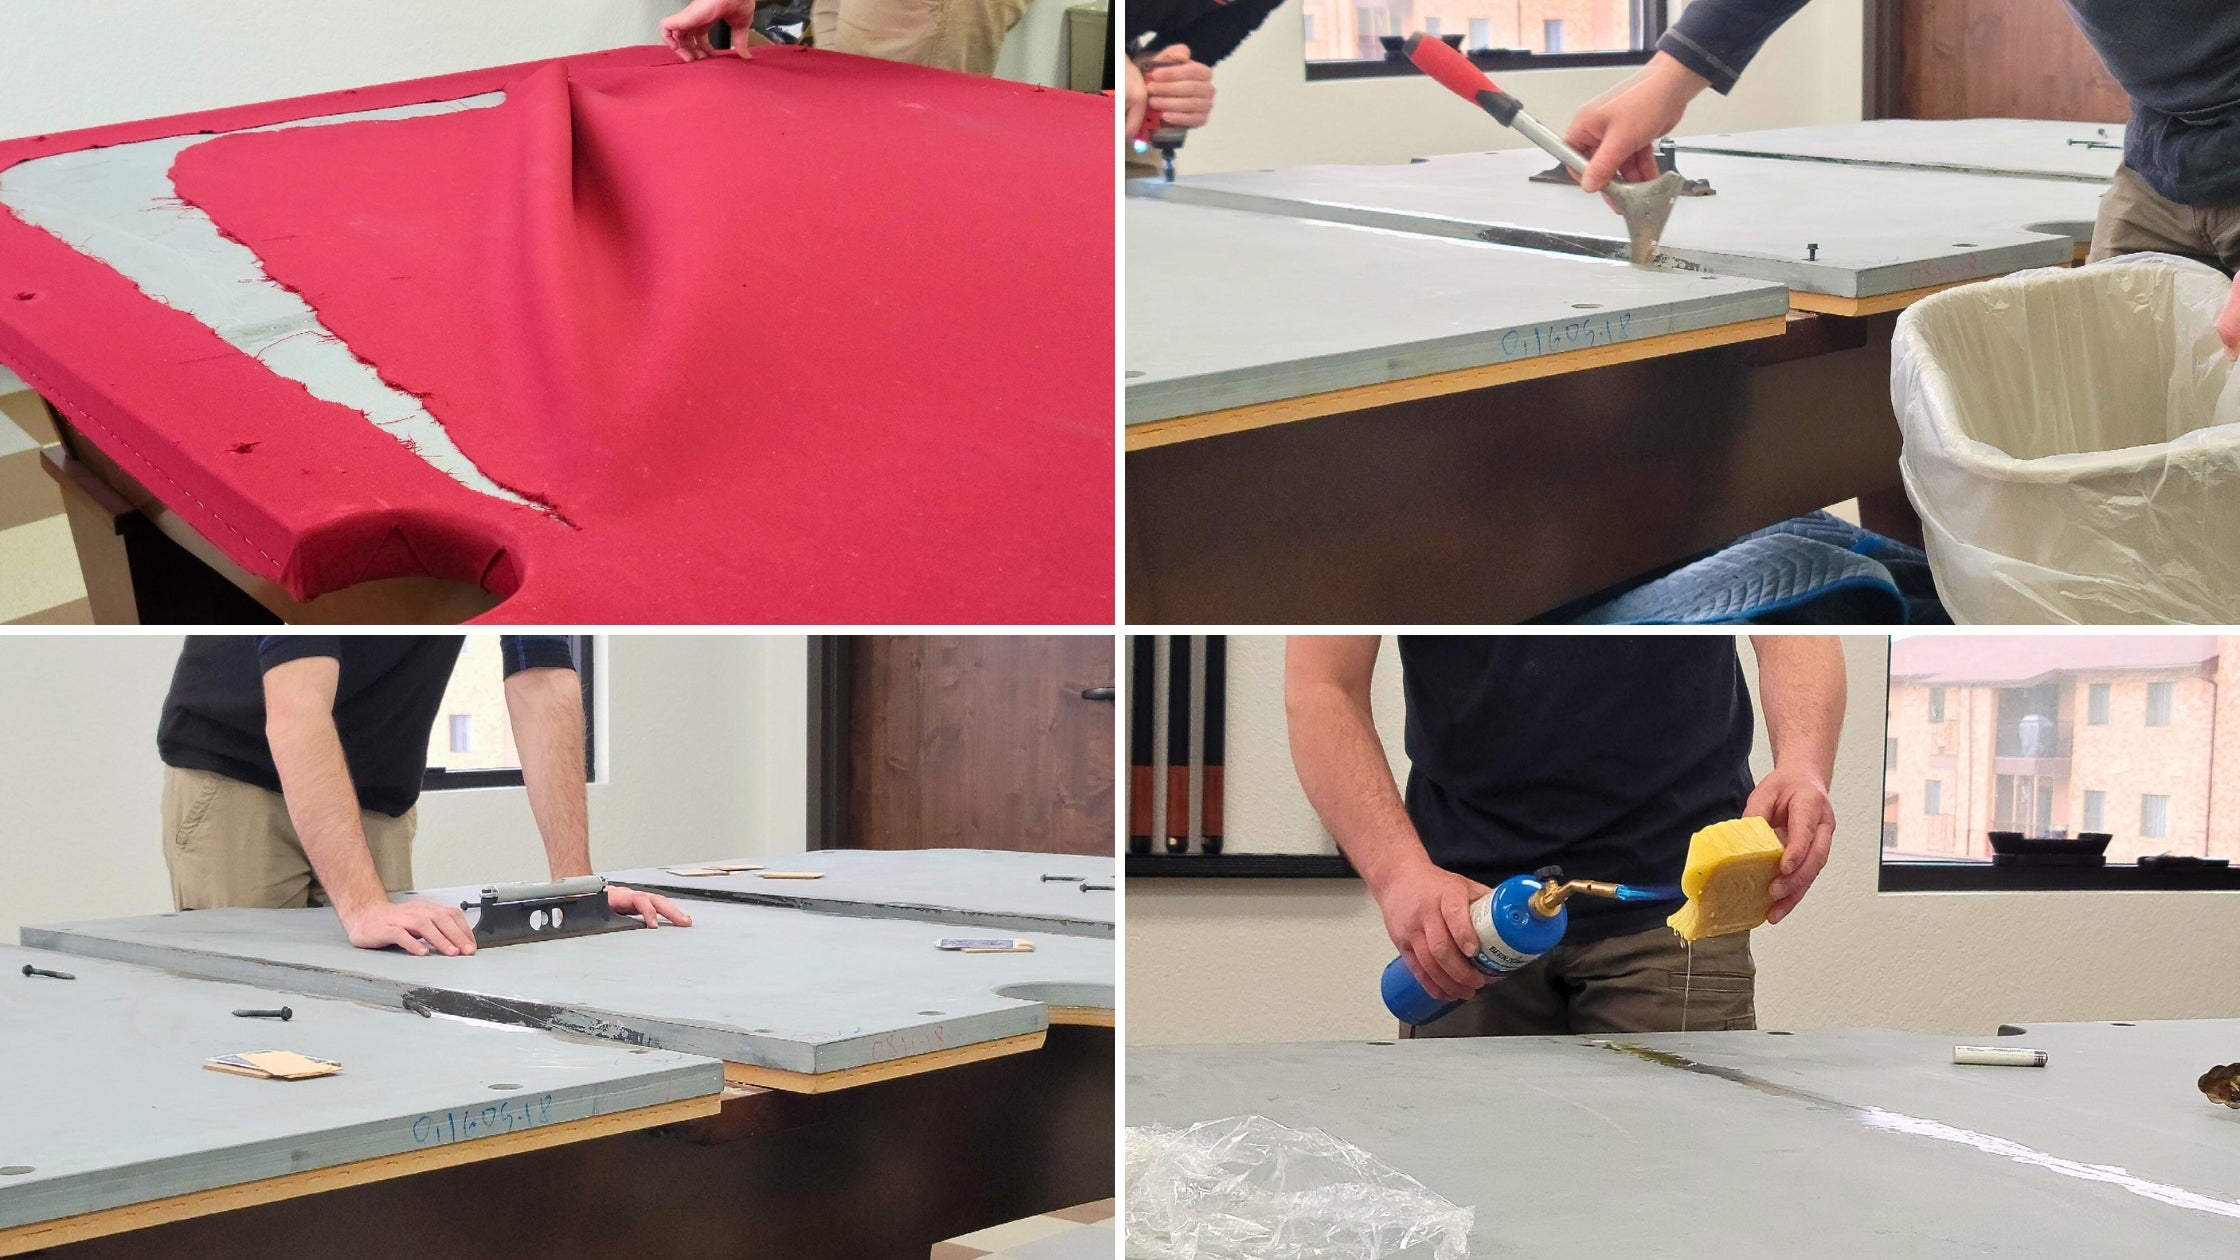 A series of four images in which CAVES technicians are removing old felt from a pool table, breaking the beeswax seal of the pool table slates, leveling the slates of the pool table, and reapplying a beeswax seal via melting it over the slates with a handheld torch